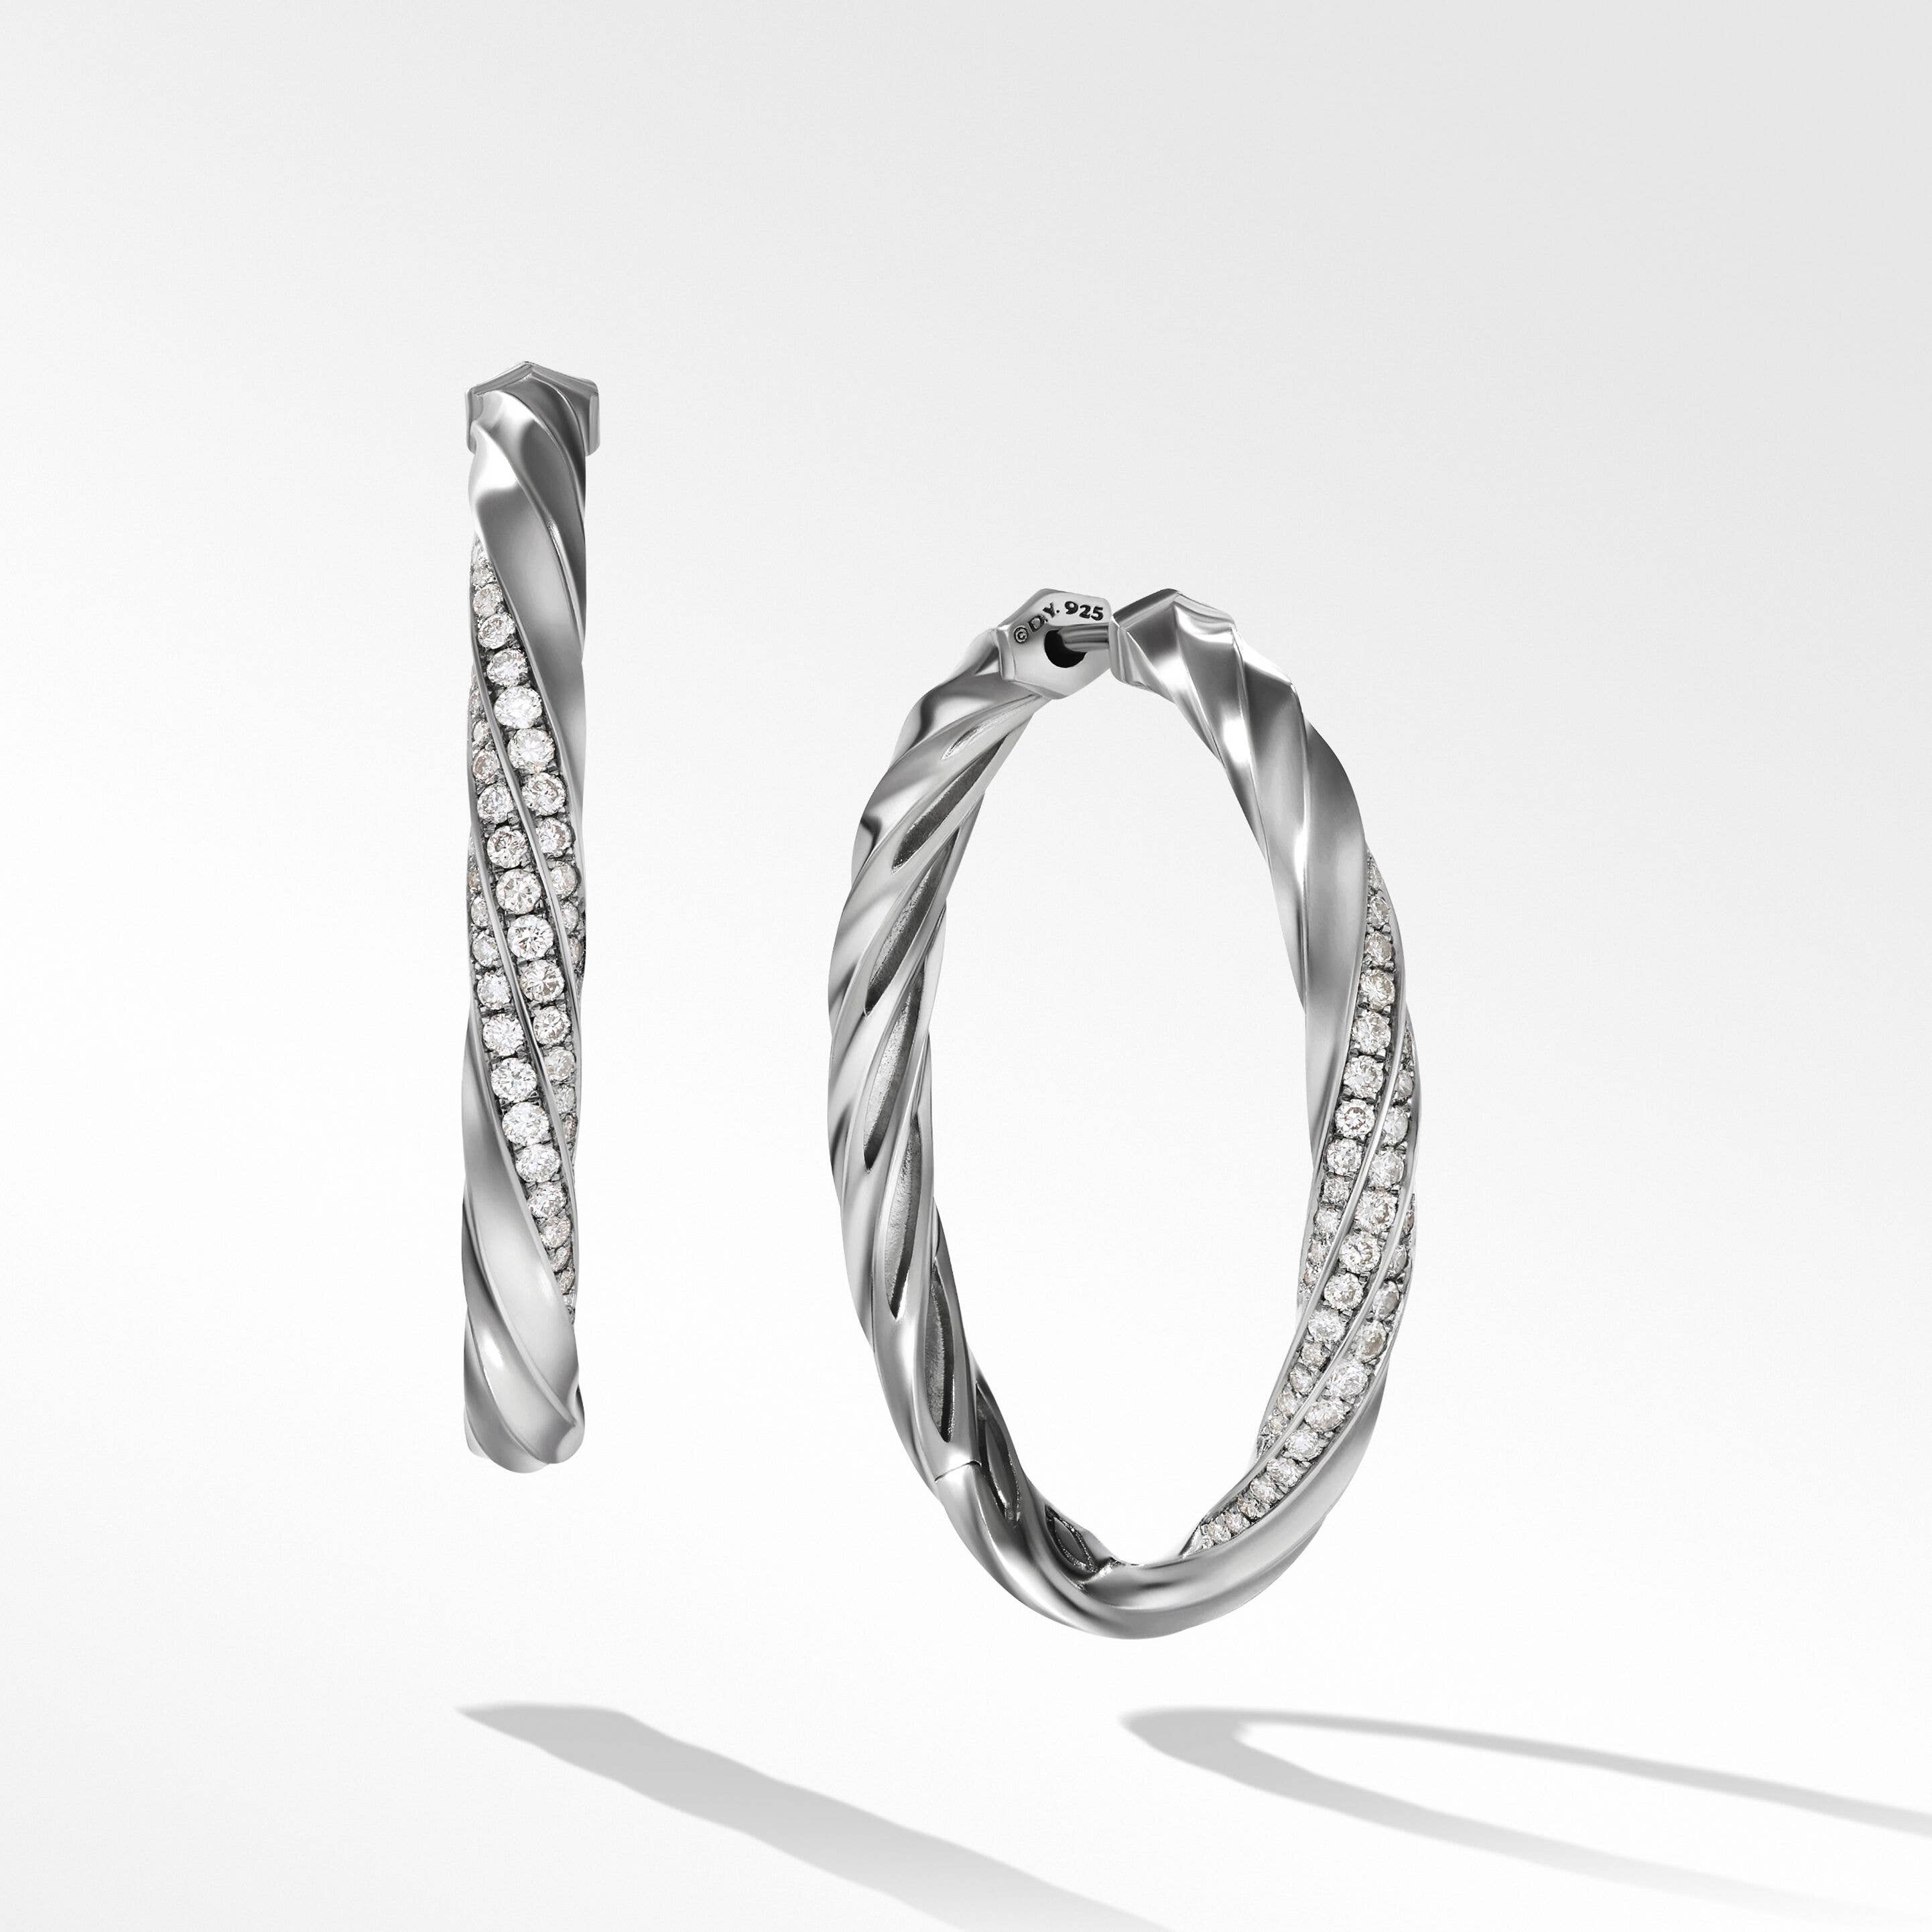 Cable Edge® Hoop Earrings in Sterling Silver with Pavé Diamonds